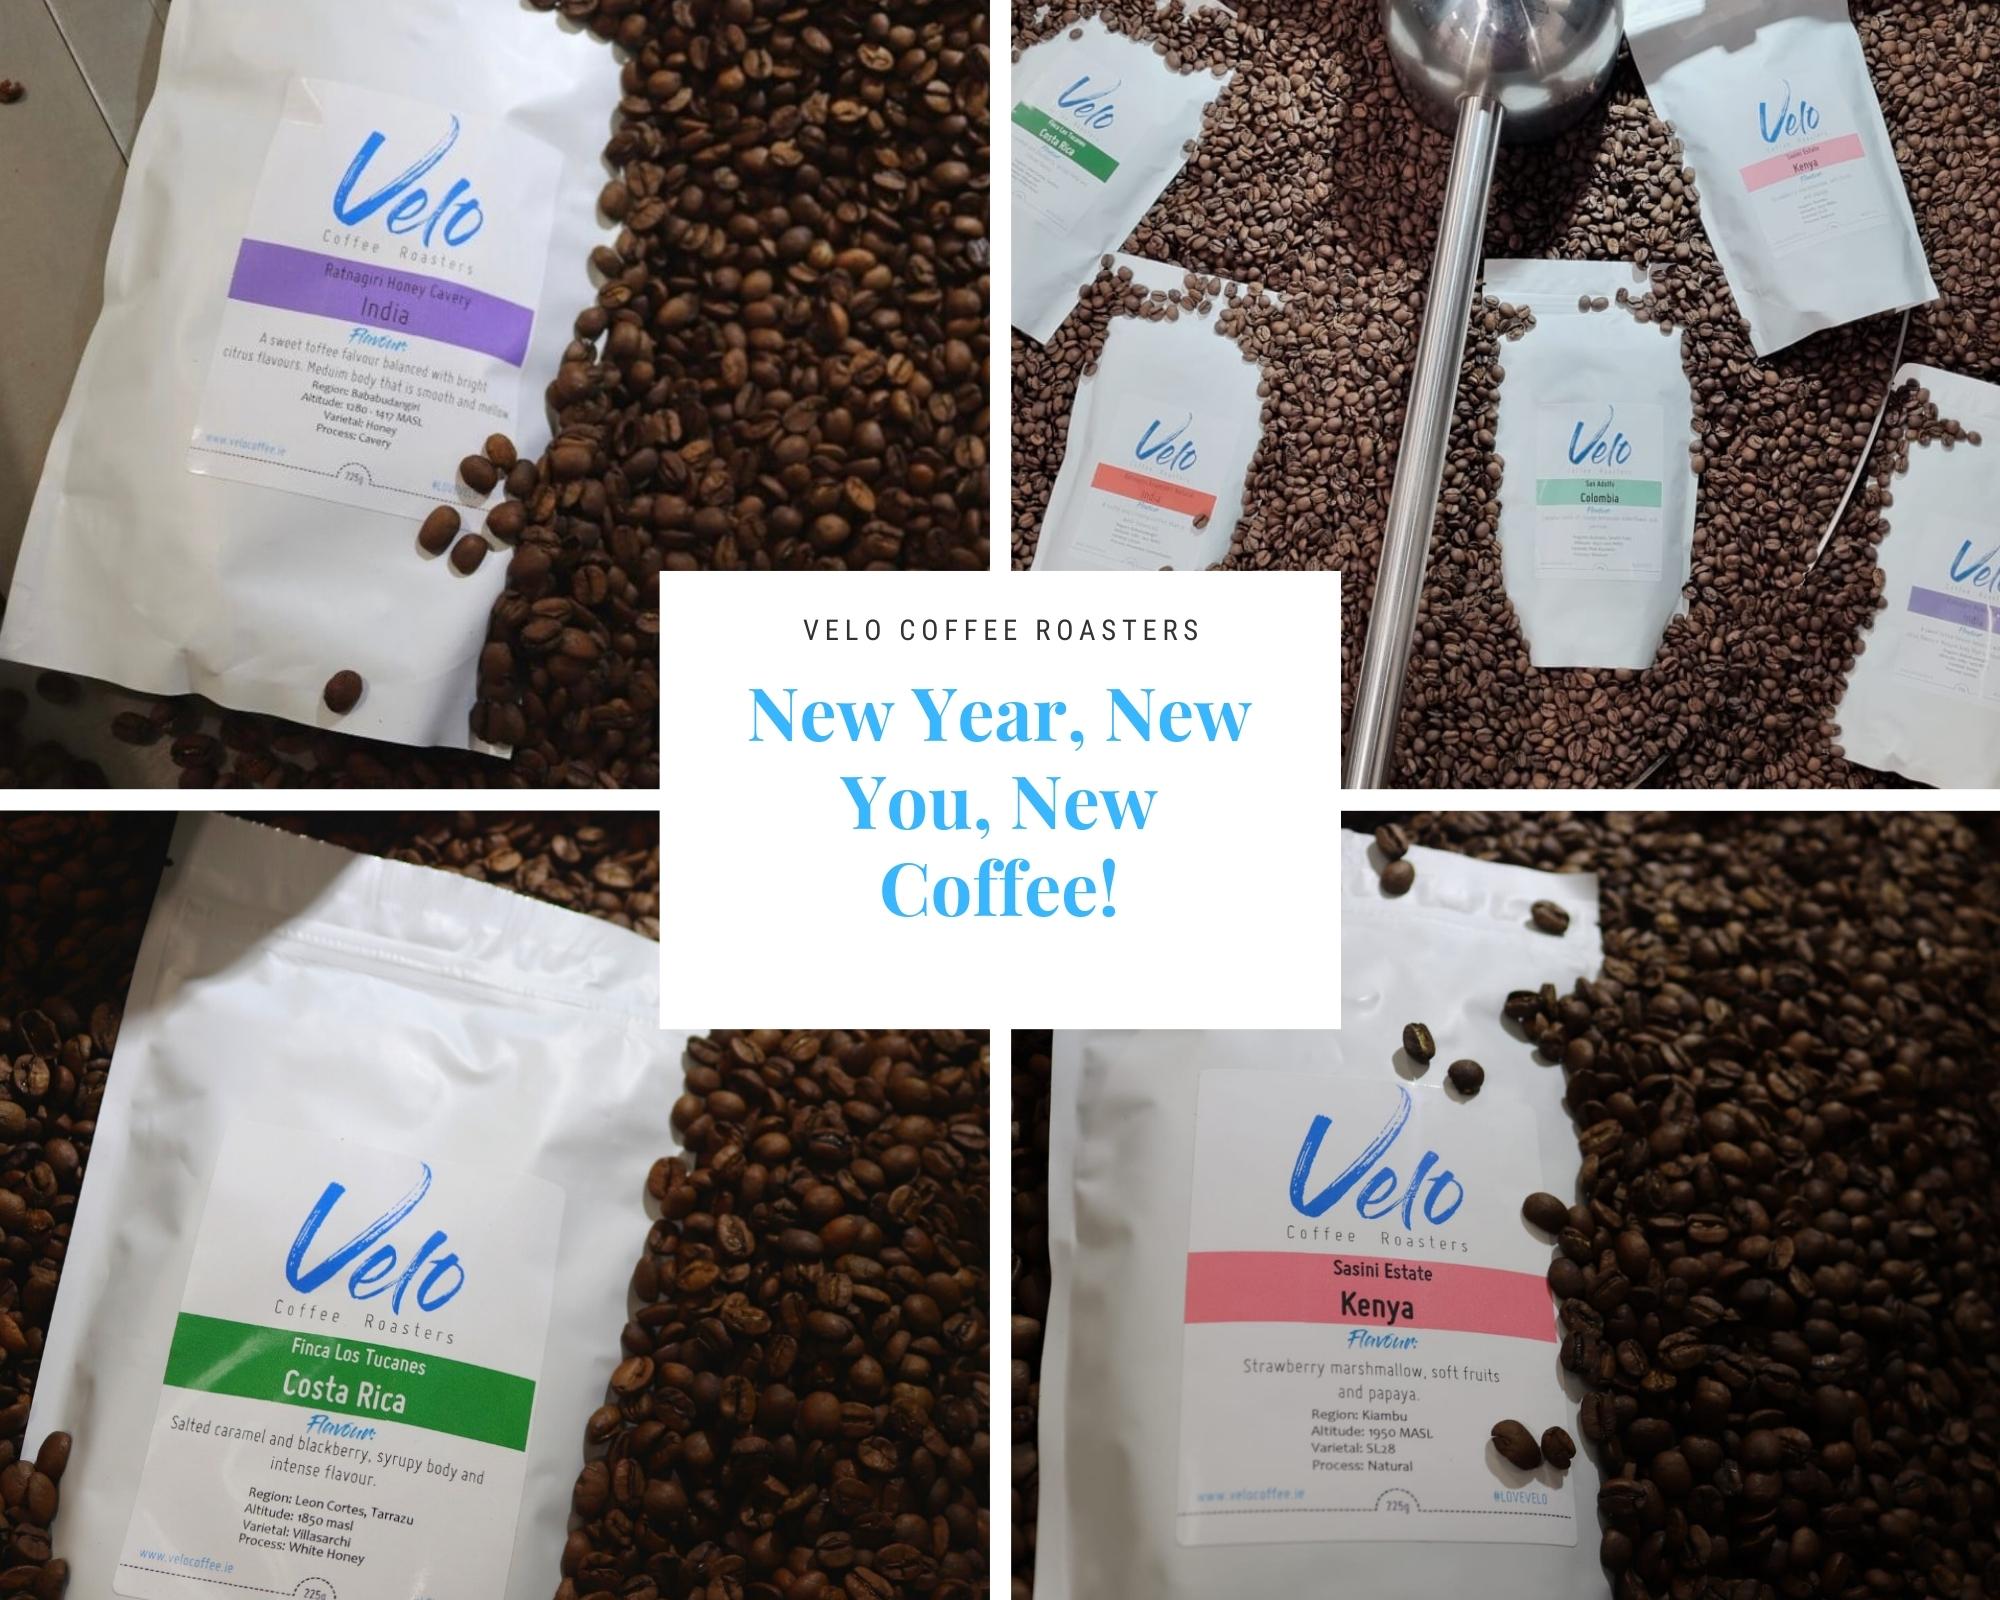 New Year, New You, New Coffee! - Velo Coffee Roasters